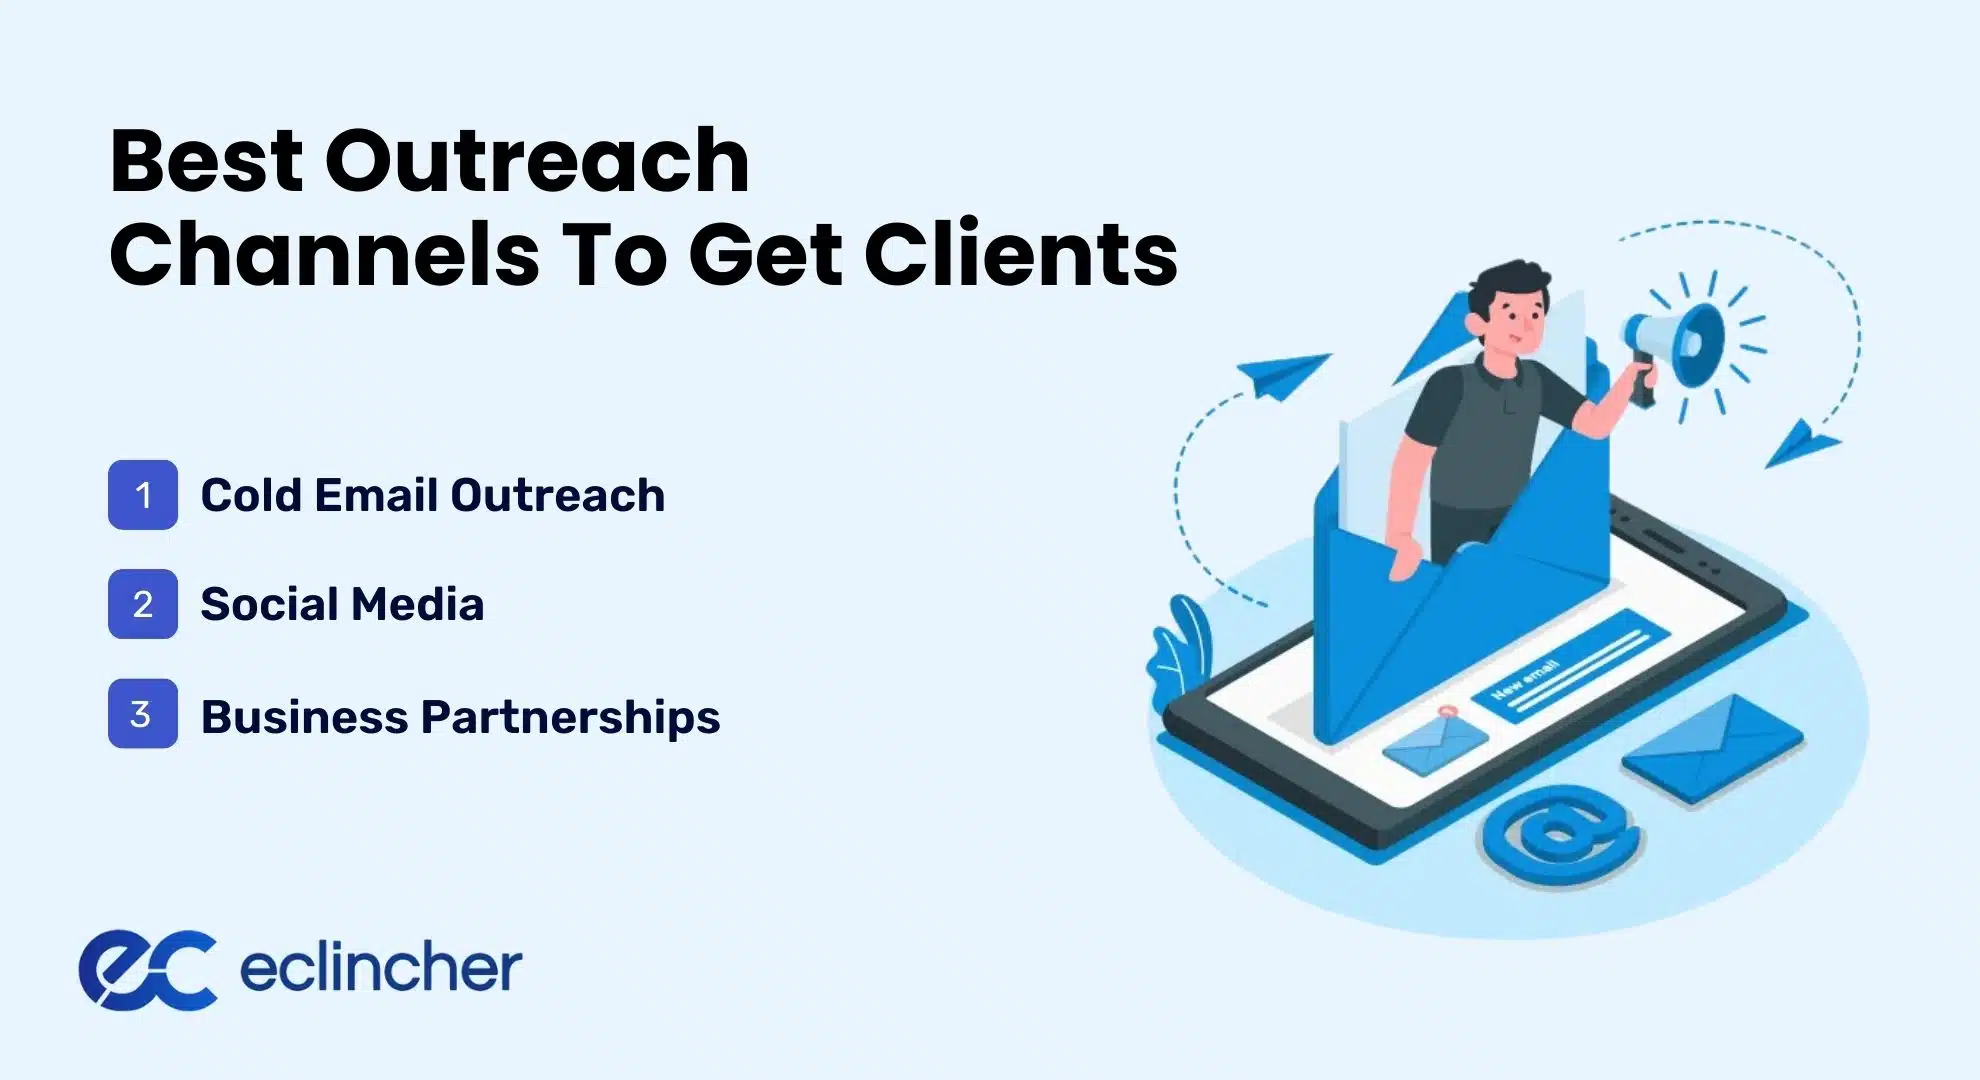 Best Outreach Channels To Get Clients